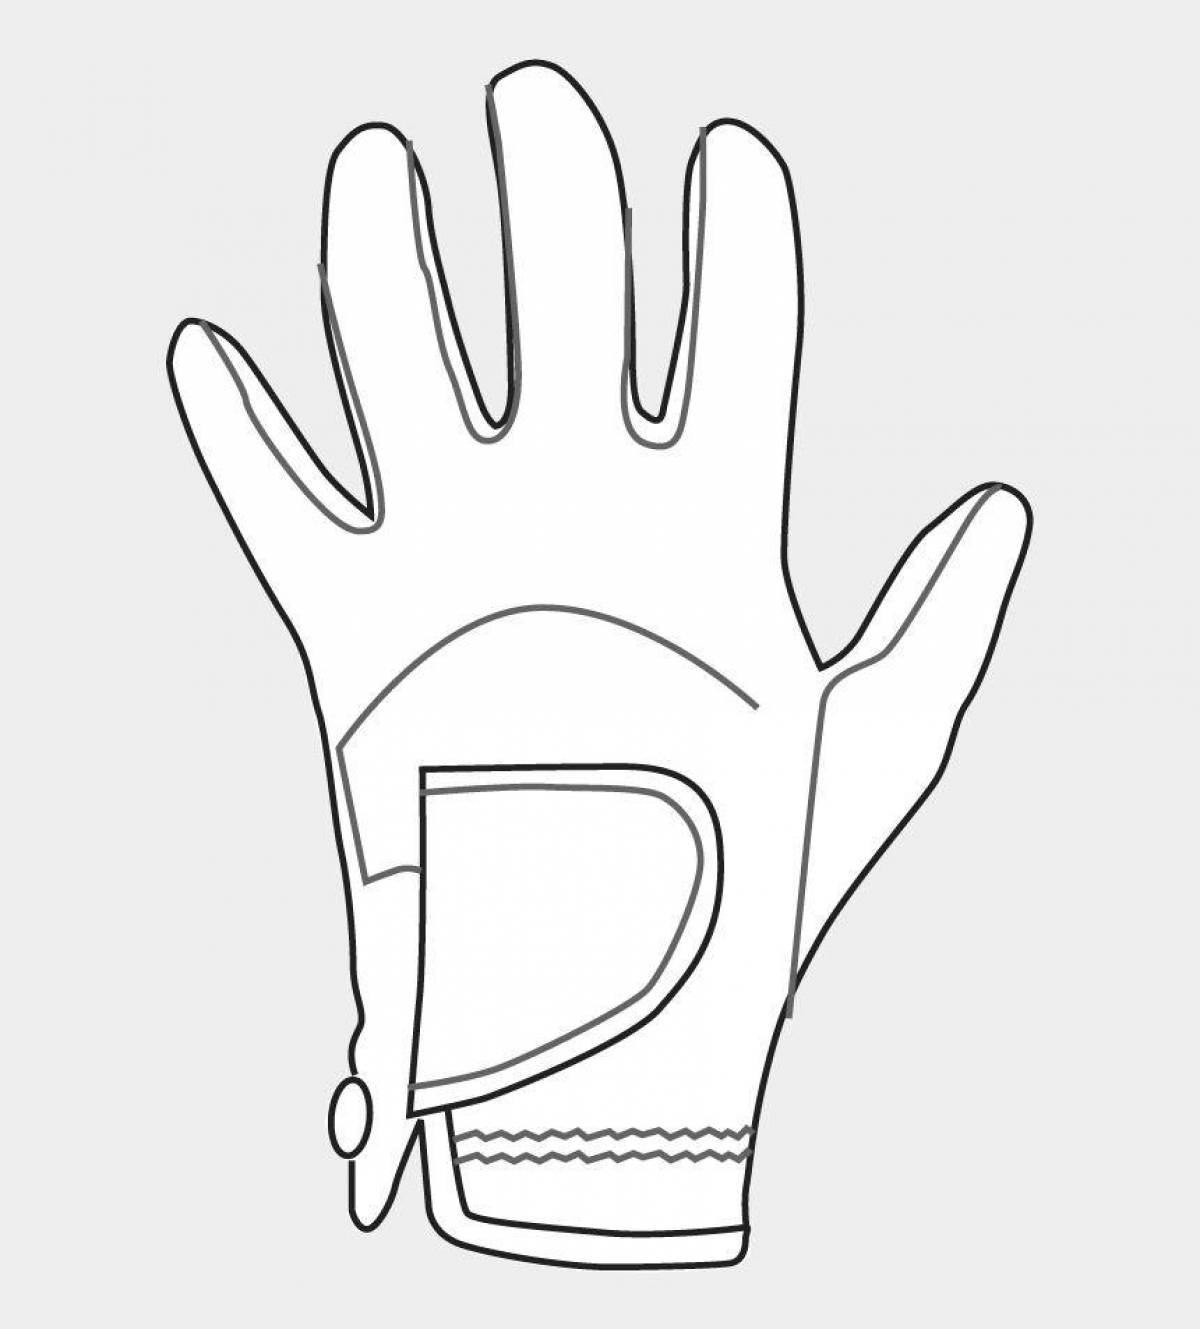 Gloves intense coloring page